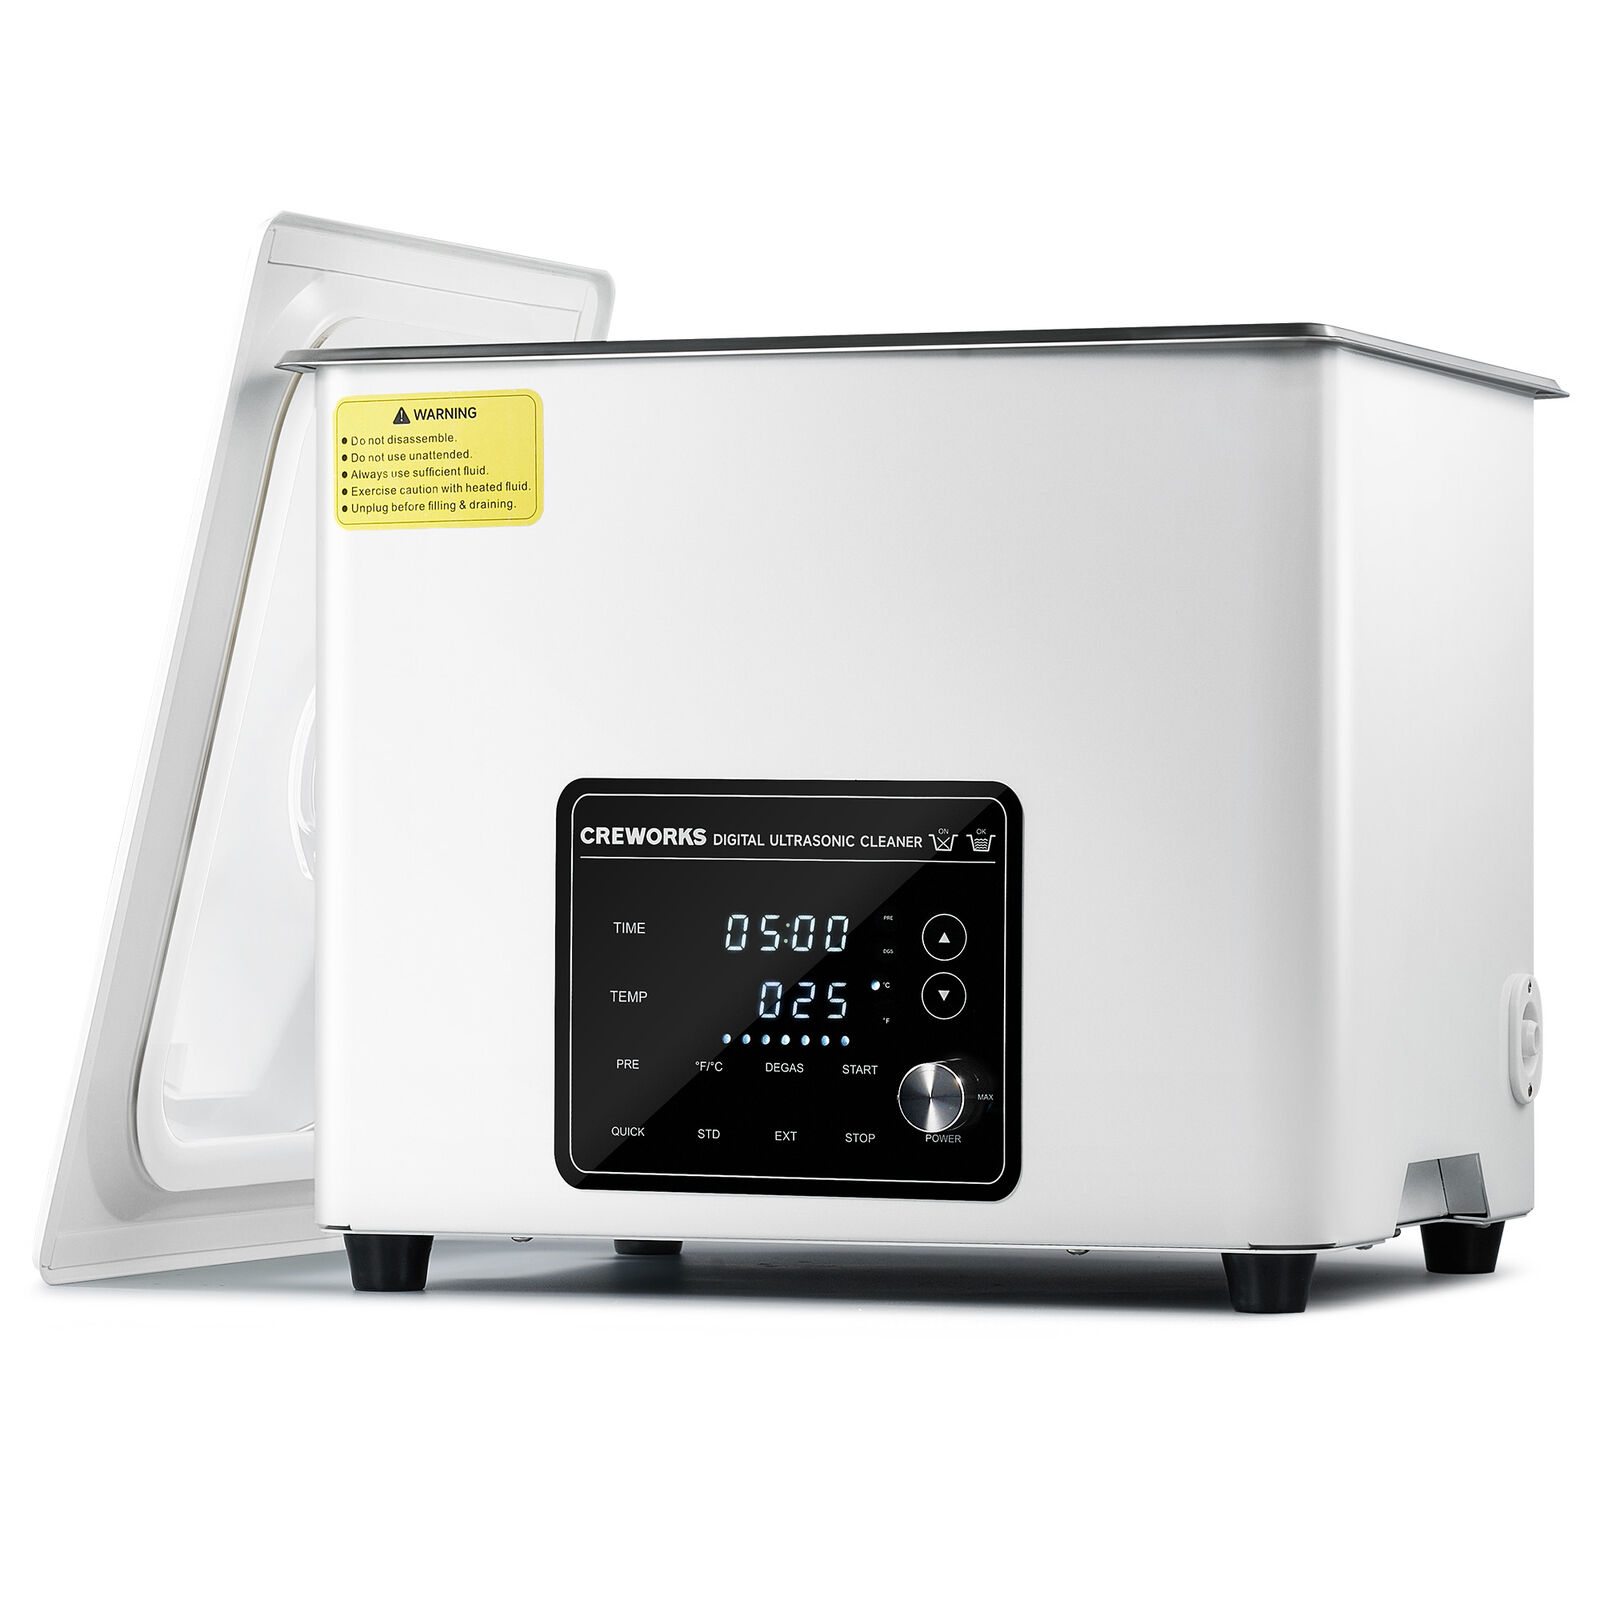 CREWORKS Smart 10L Ultrasonic Cleaner 300W Heater with Degas & Preheating Mode